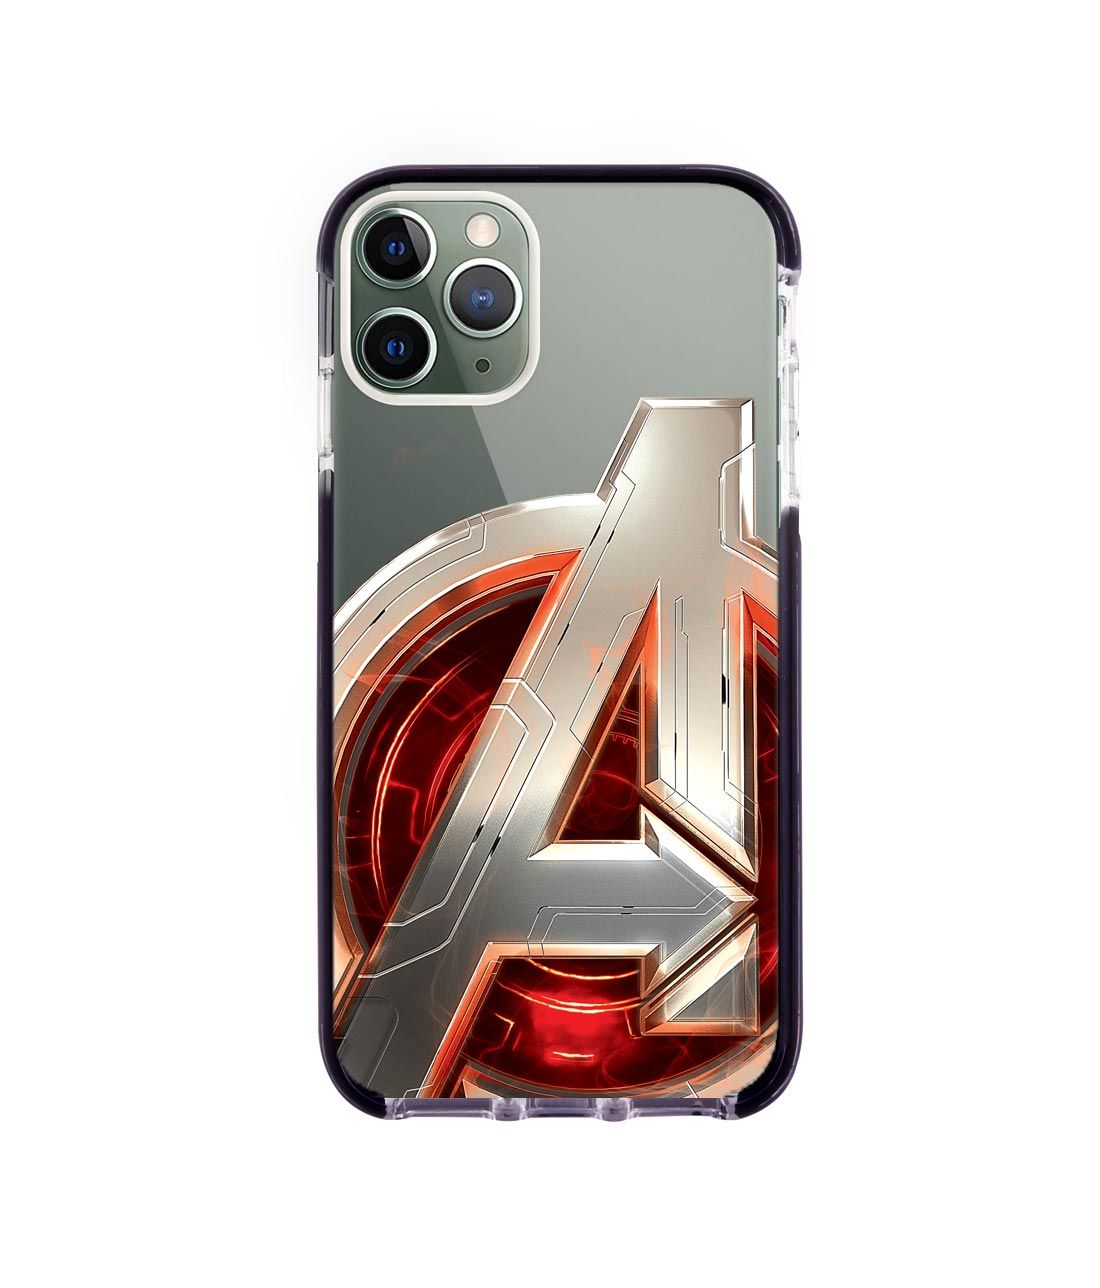 Avengers Version 2 - Extreme Phone Case for iPhone 11 Pro